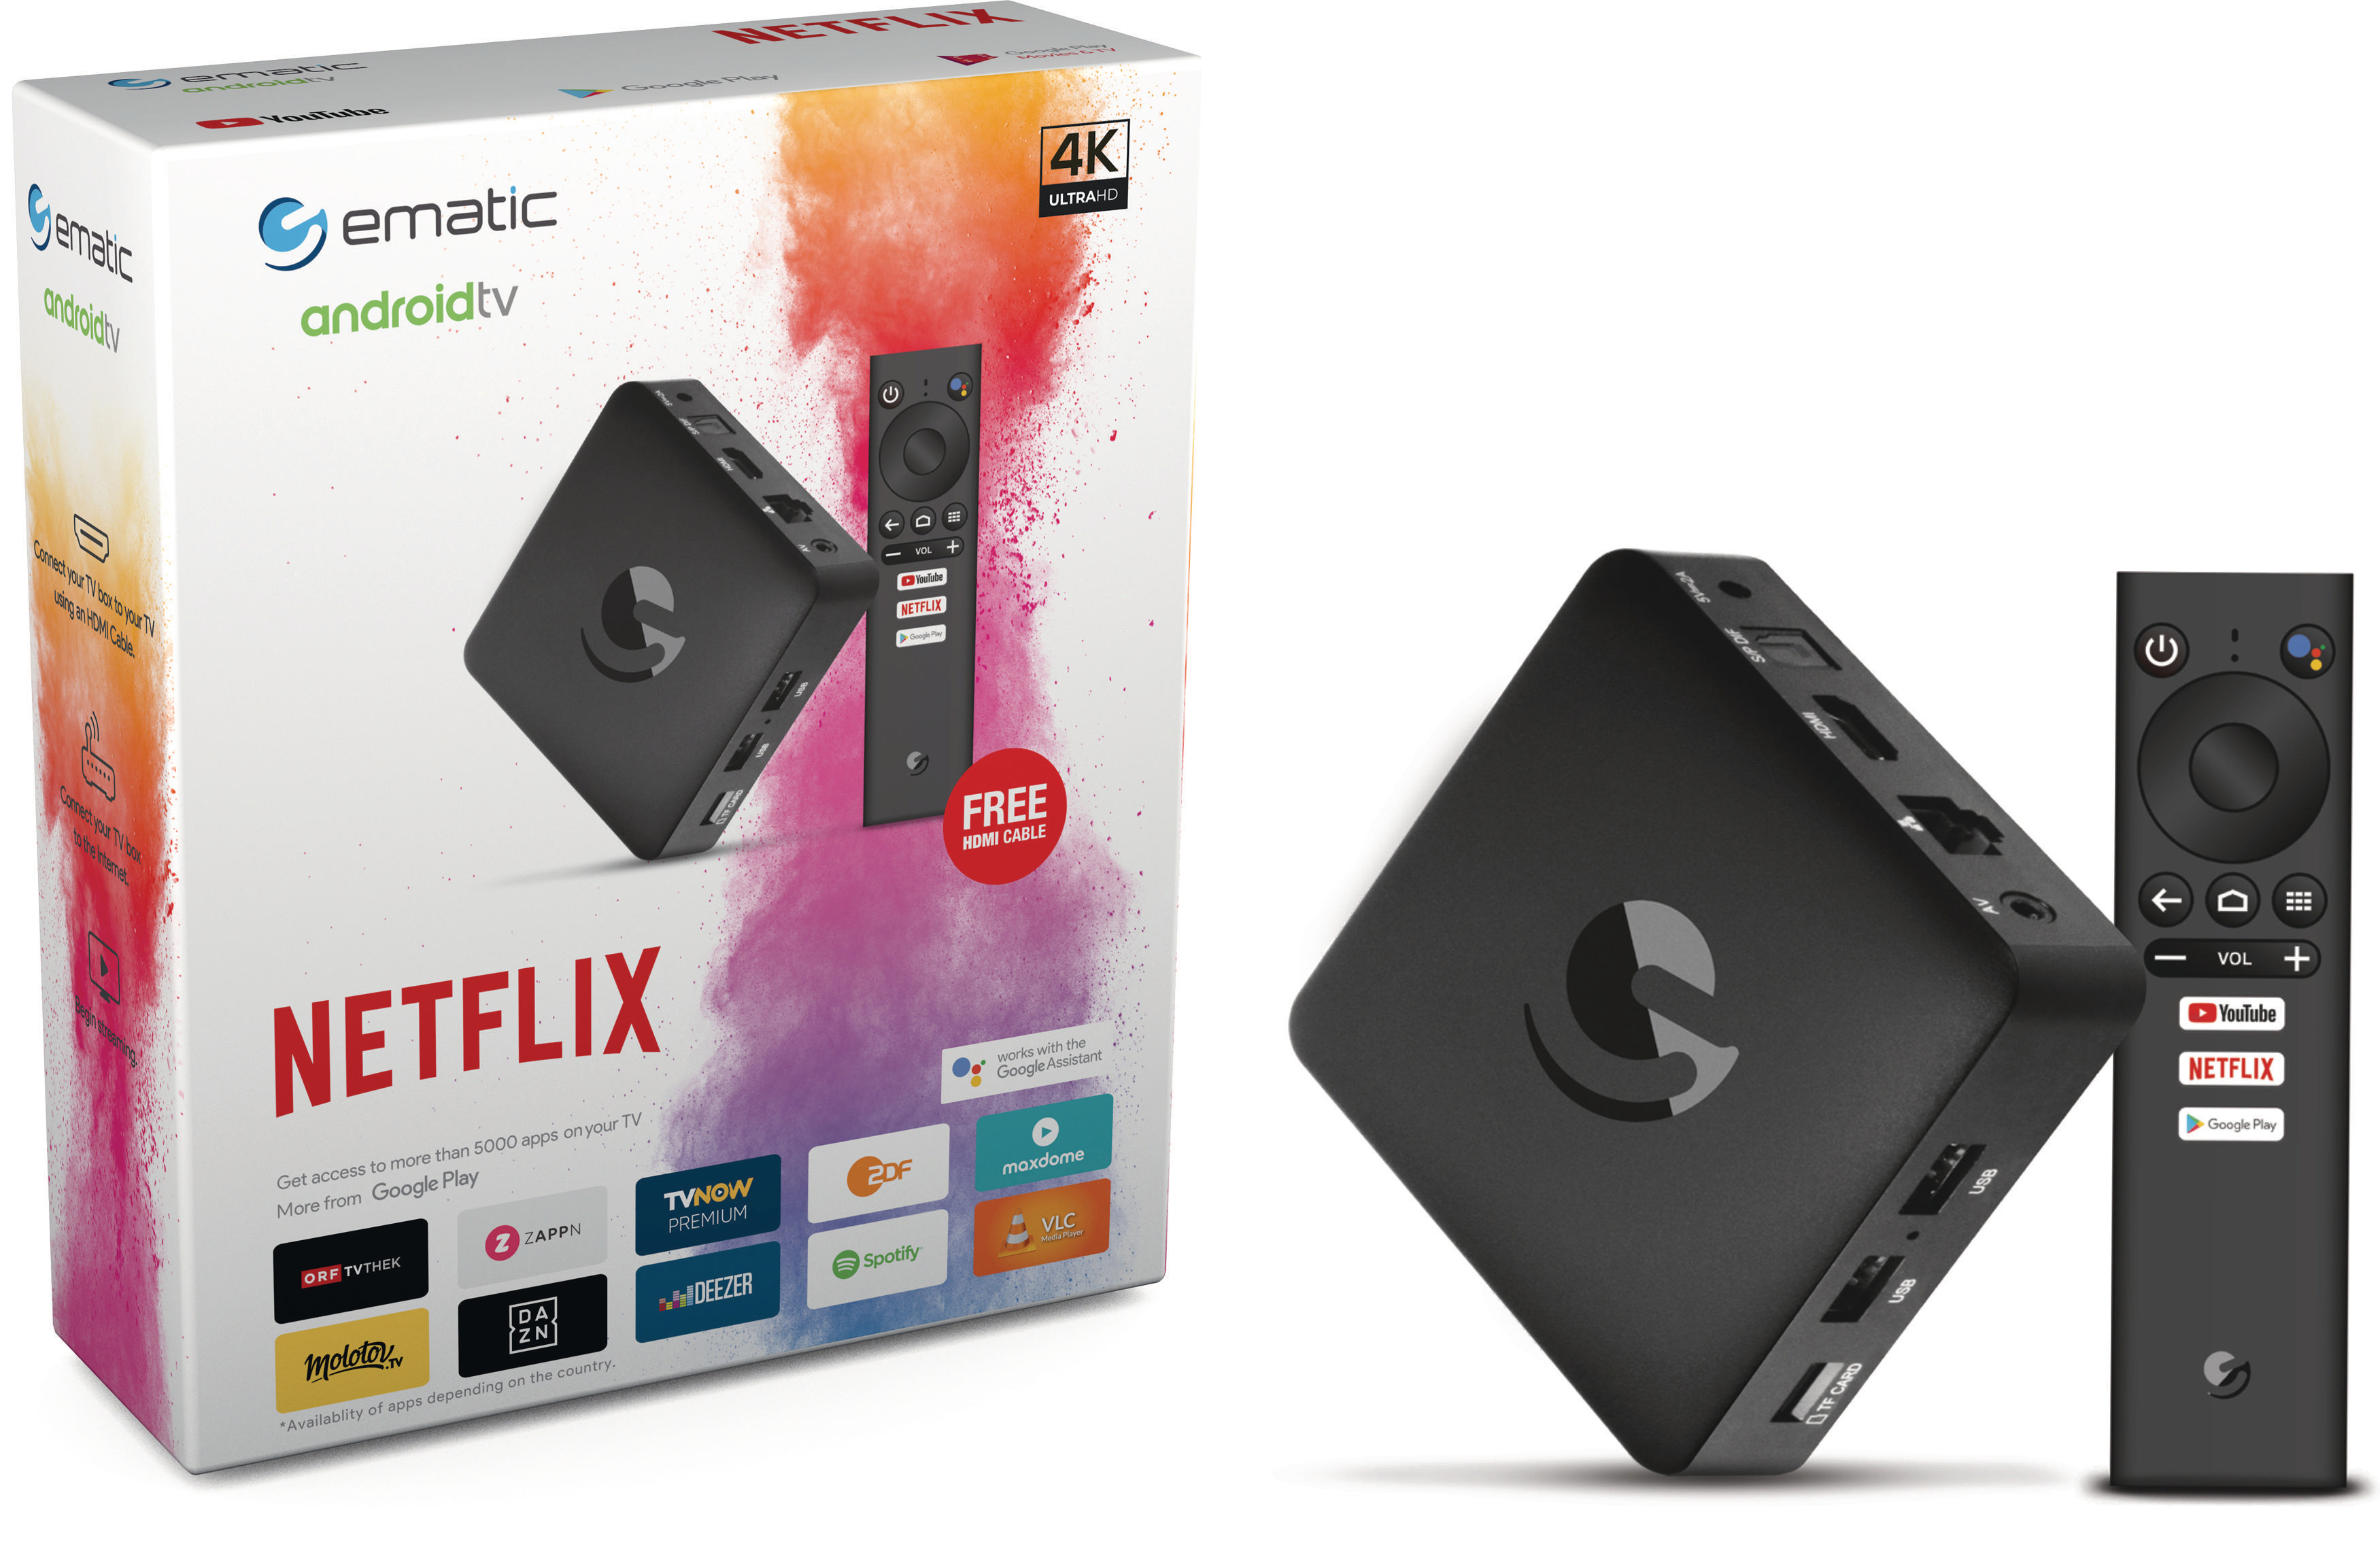 EMATIC 4K SRT202 Box Android Streaming